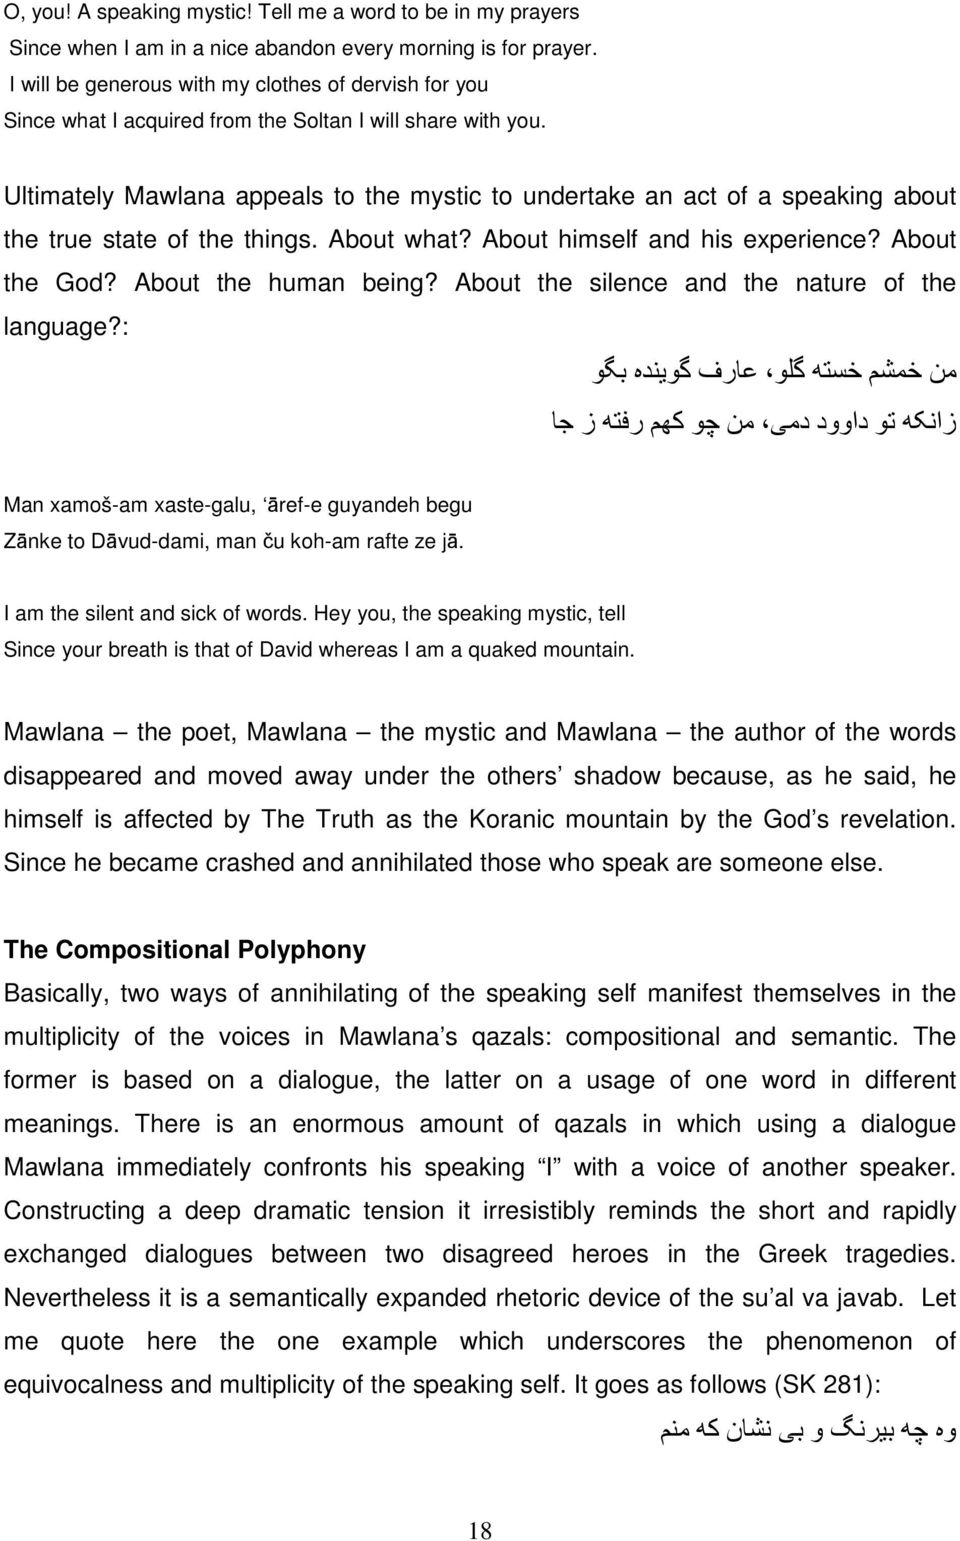 Ultimately Mawlana appeals to the mystic to undertake an act of a speaking about the true state of the things. About what? About himself and his experience? About the God? About the human being?